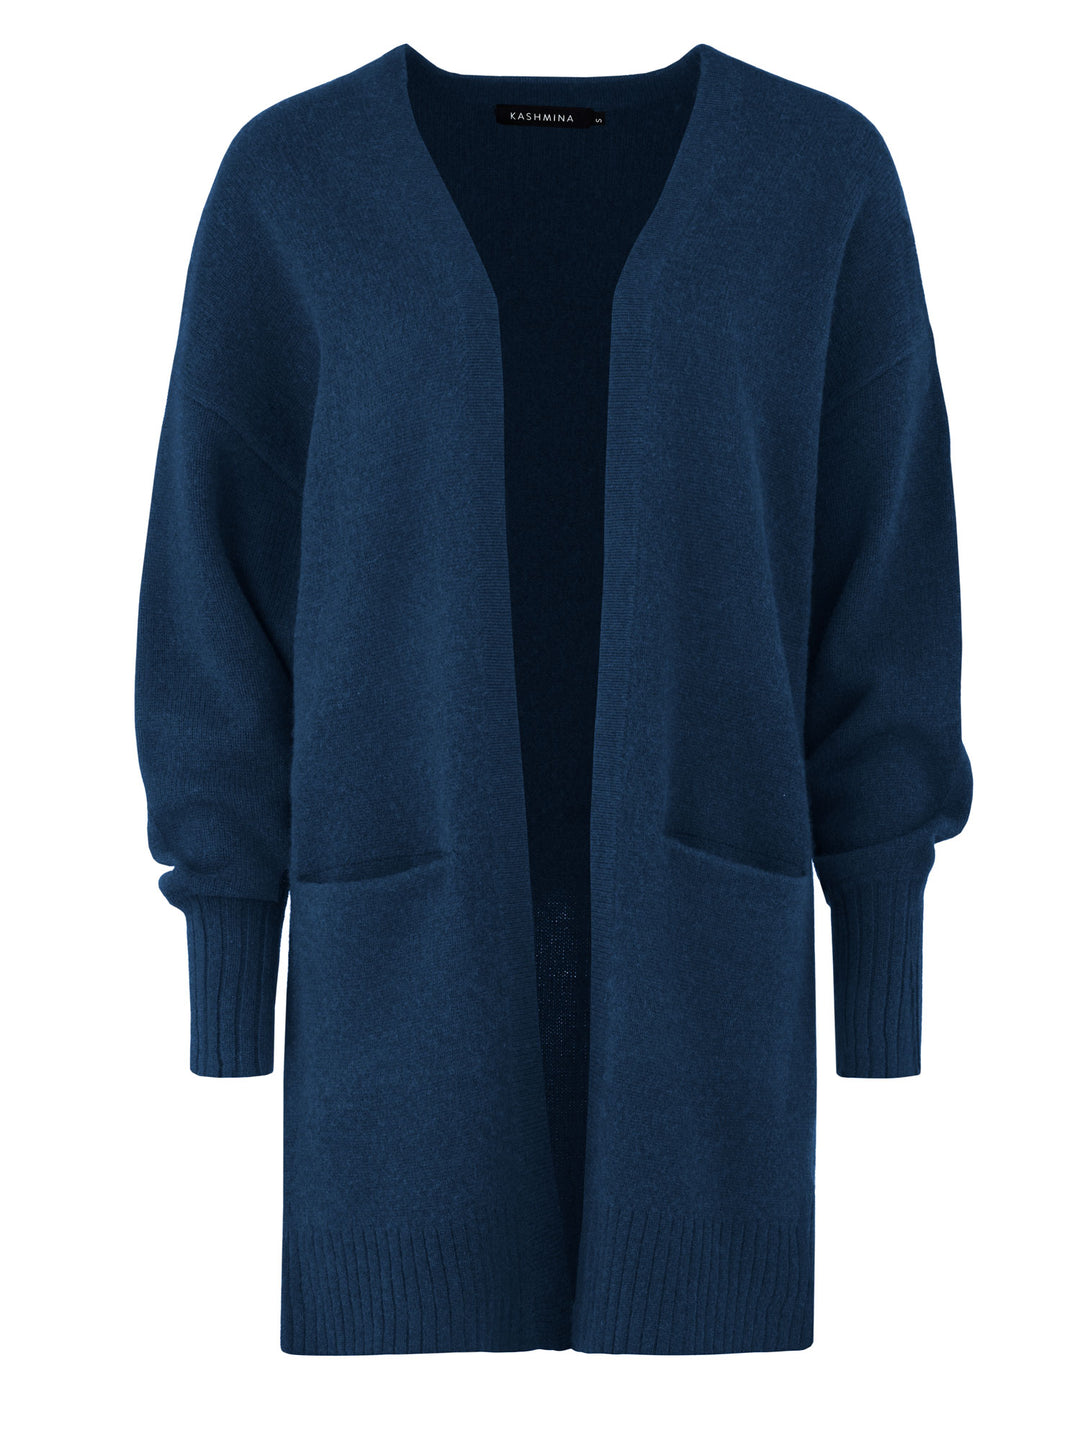 Cashmere cardigan in 100% cashmere by Kashmina, lounge, mountain blue